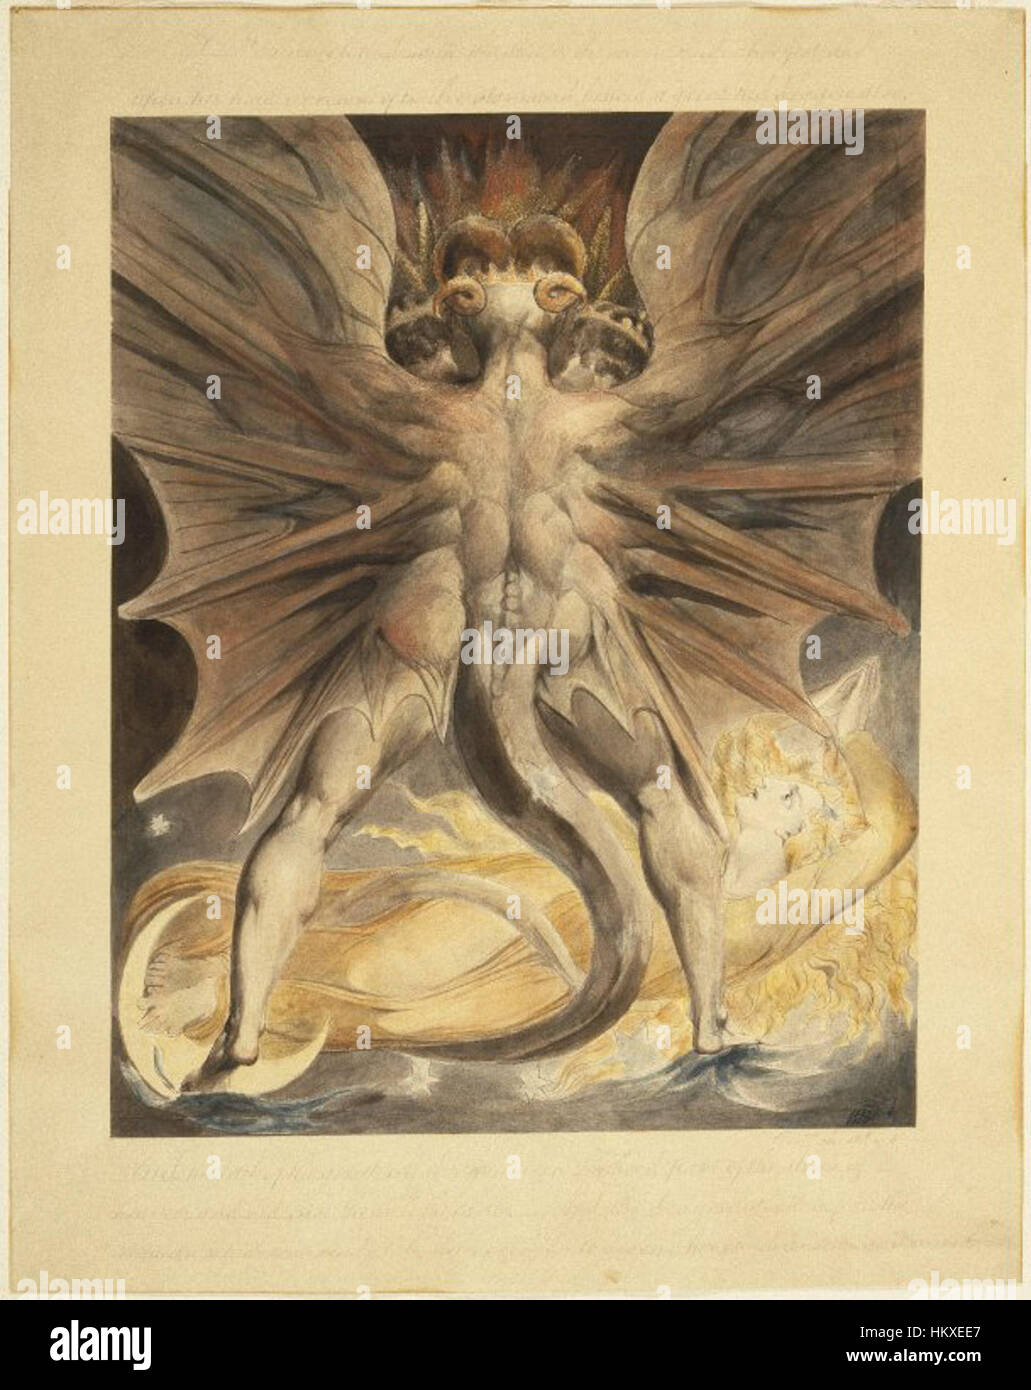 Brooklyn Museum - The Great Red Dragon and the Woman Clothed with the Sun (Rev. 12 1-4) - William Blake Stock Photo